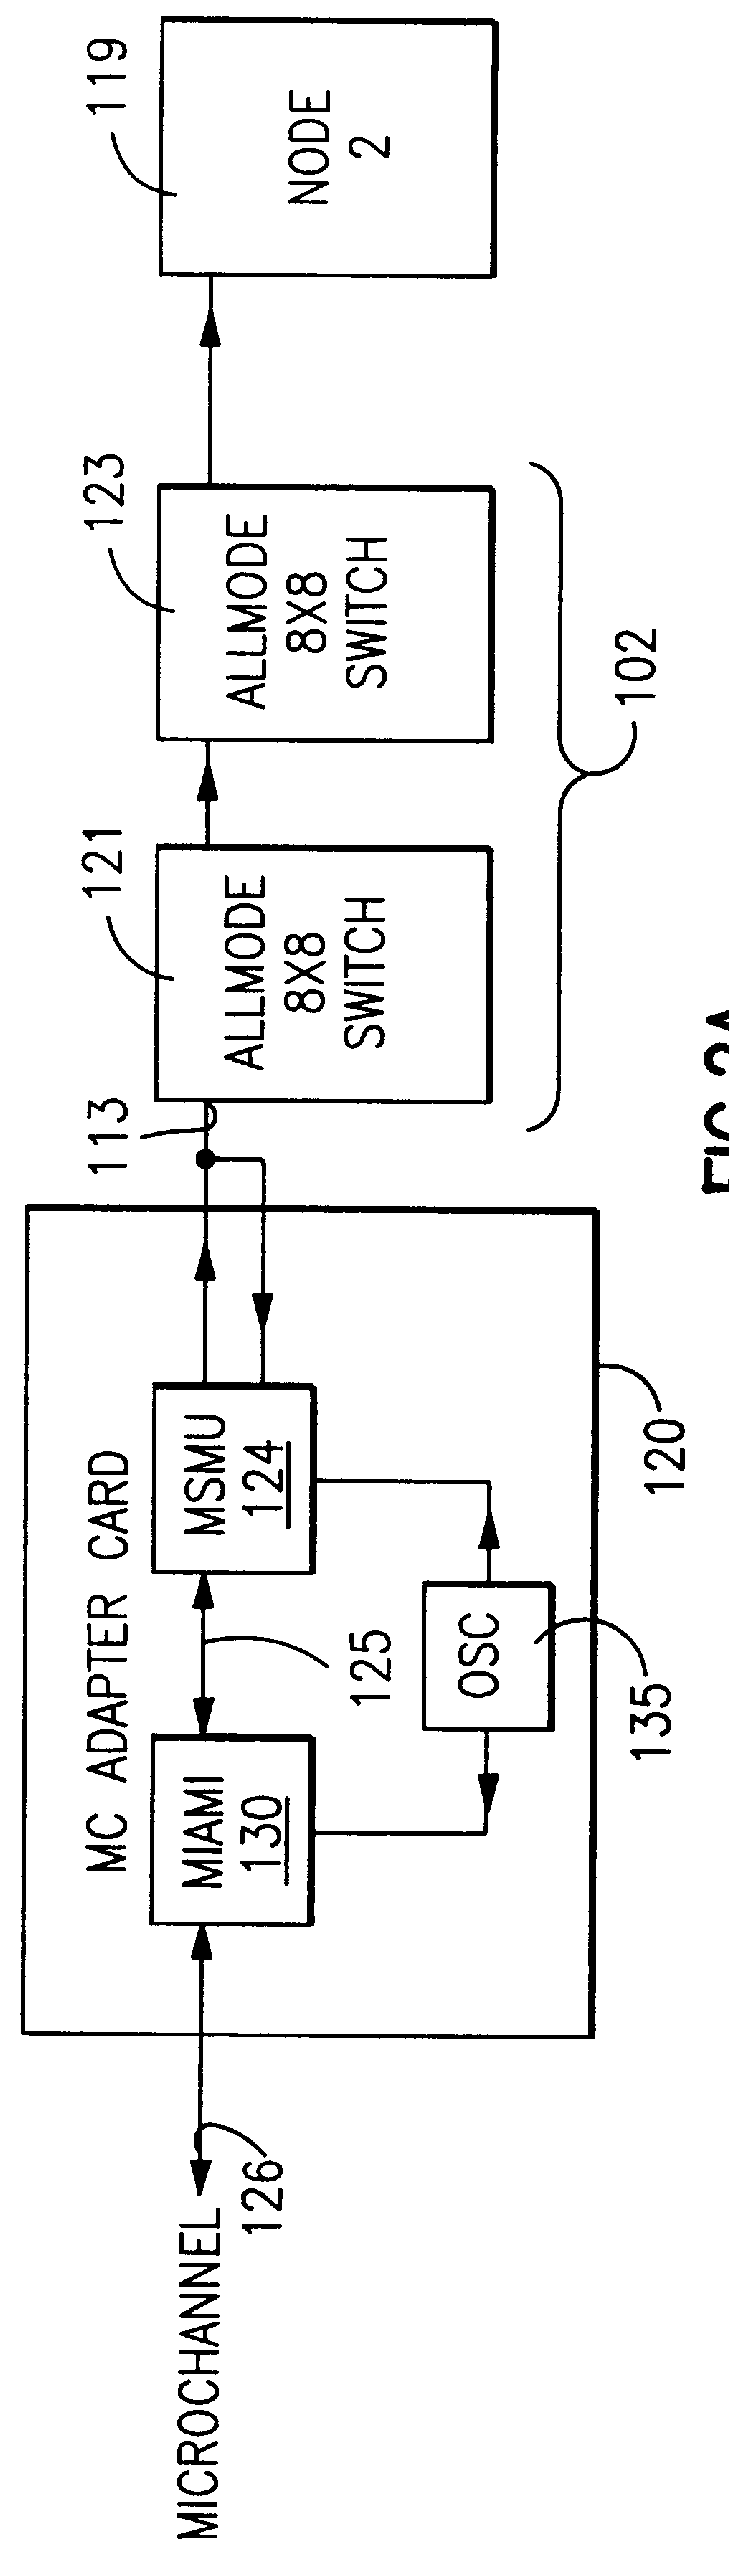 Multi-tasking adapter for parallel network applications